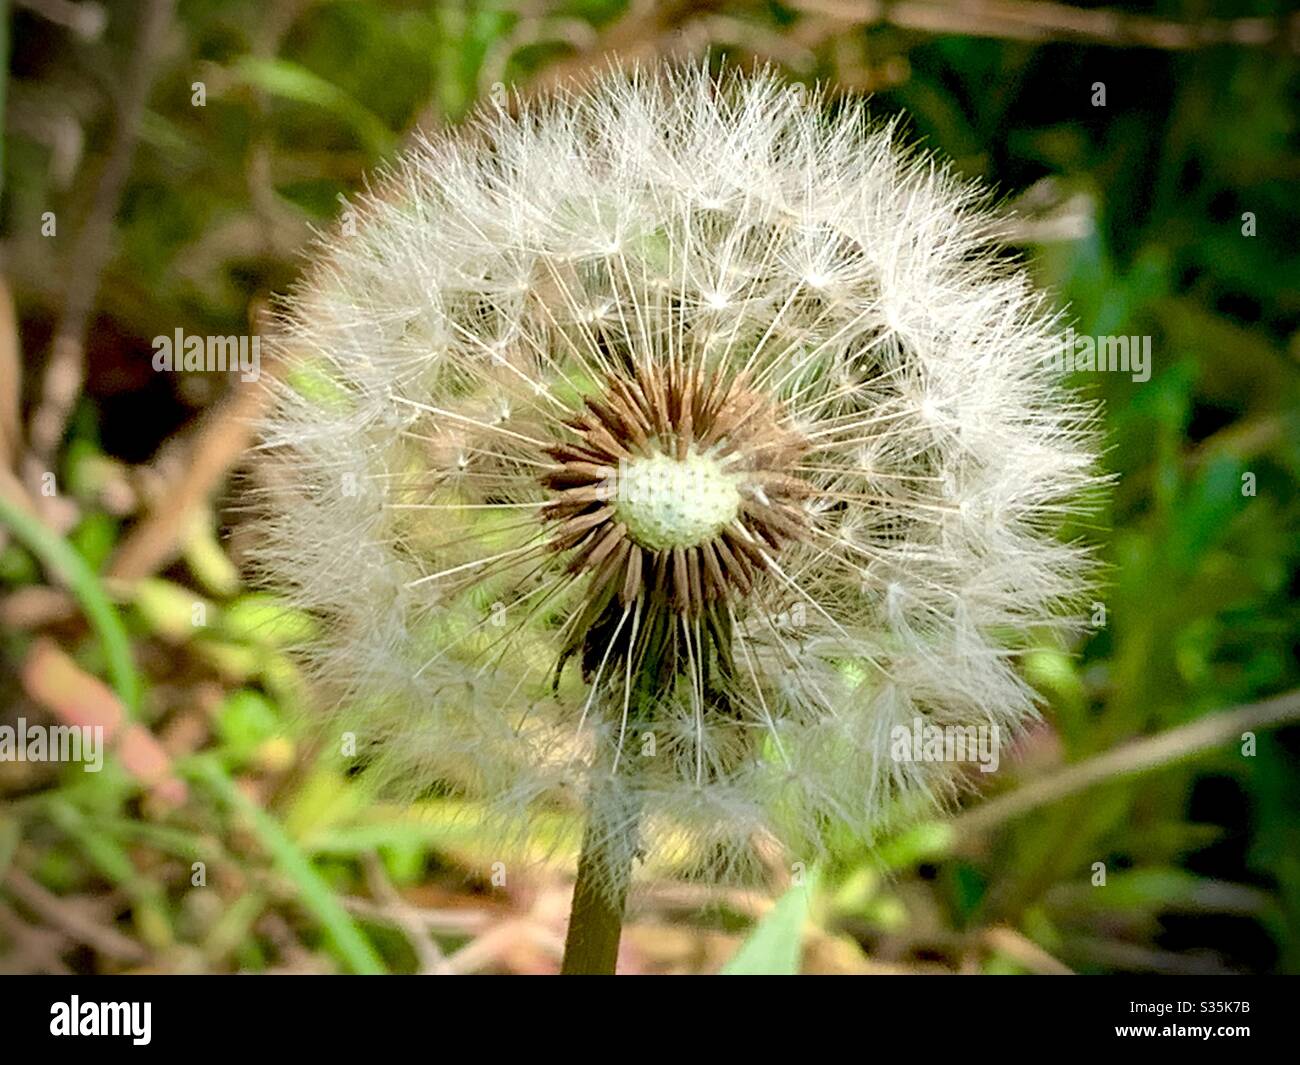 The beauty of nature with a dandelion seedhead Stock Photo